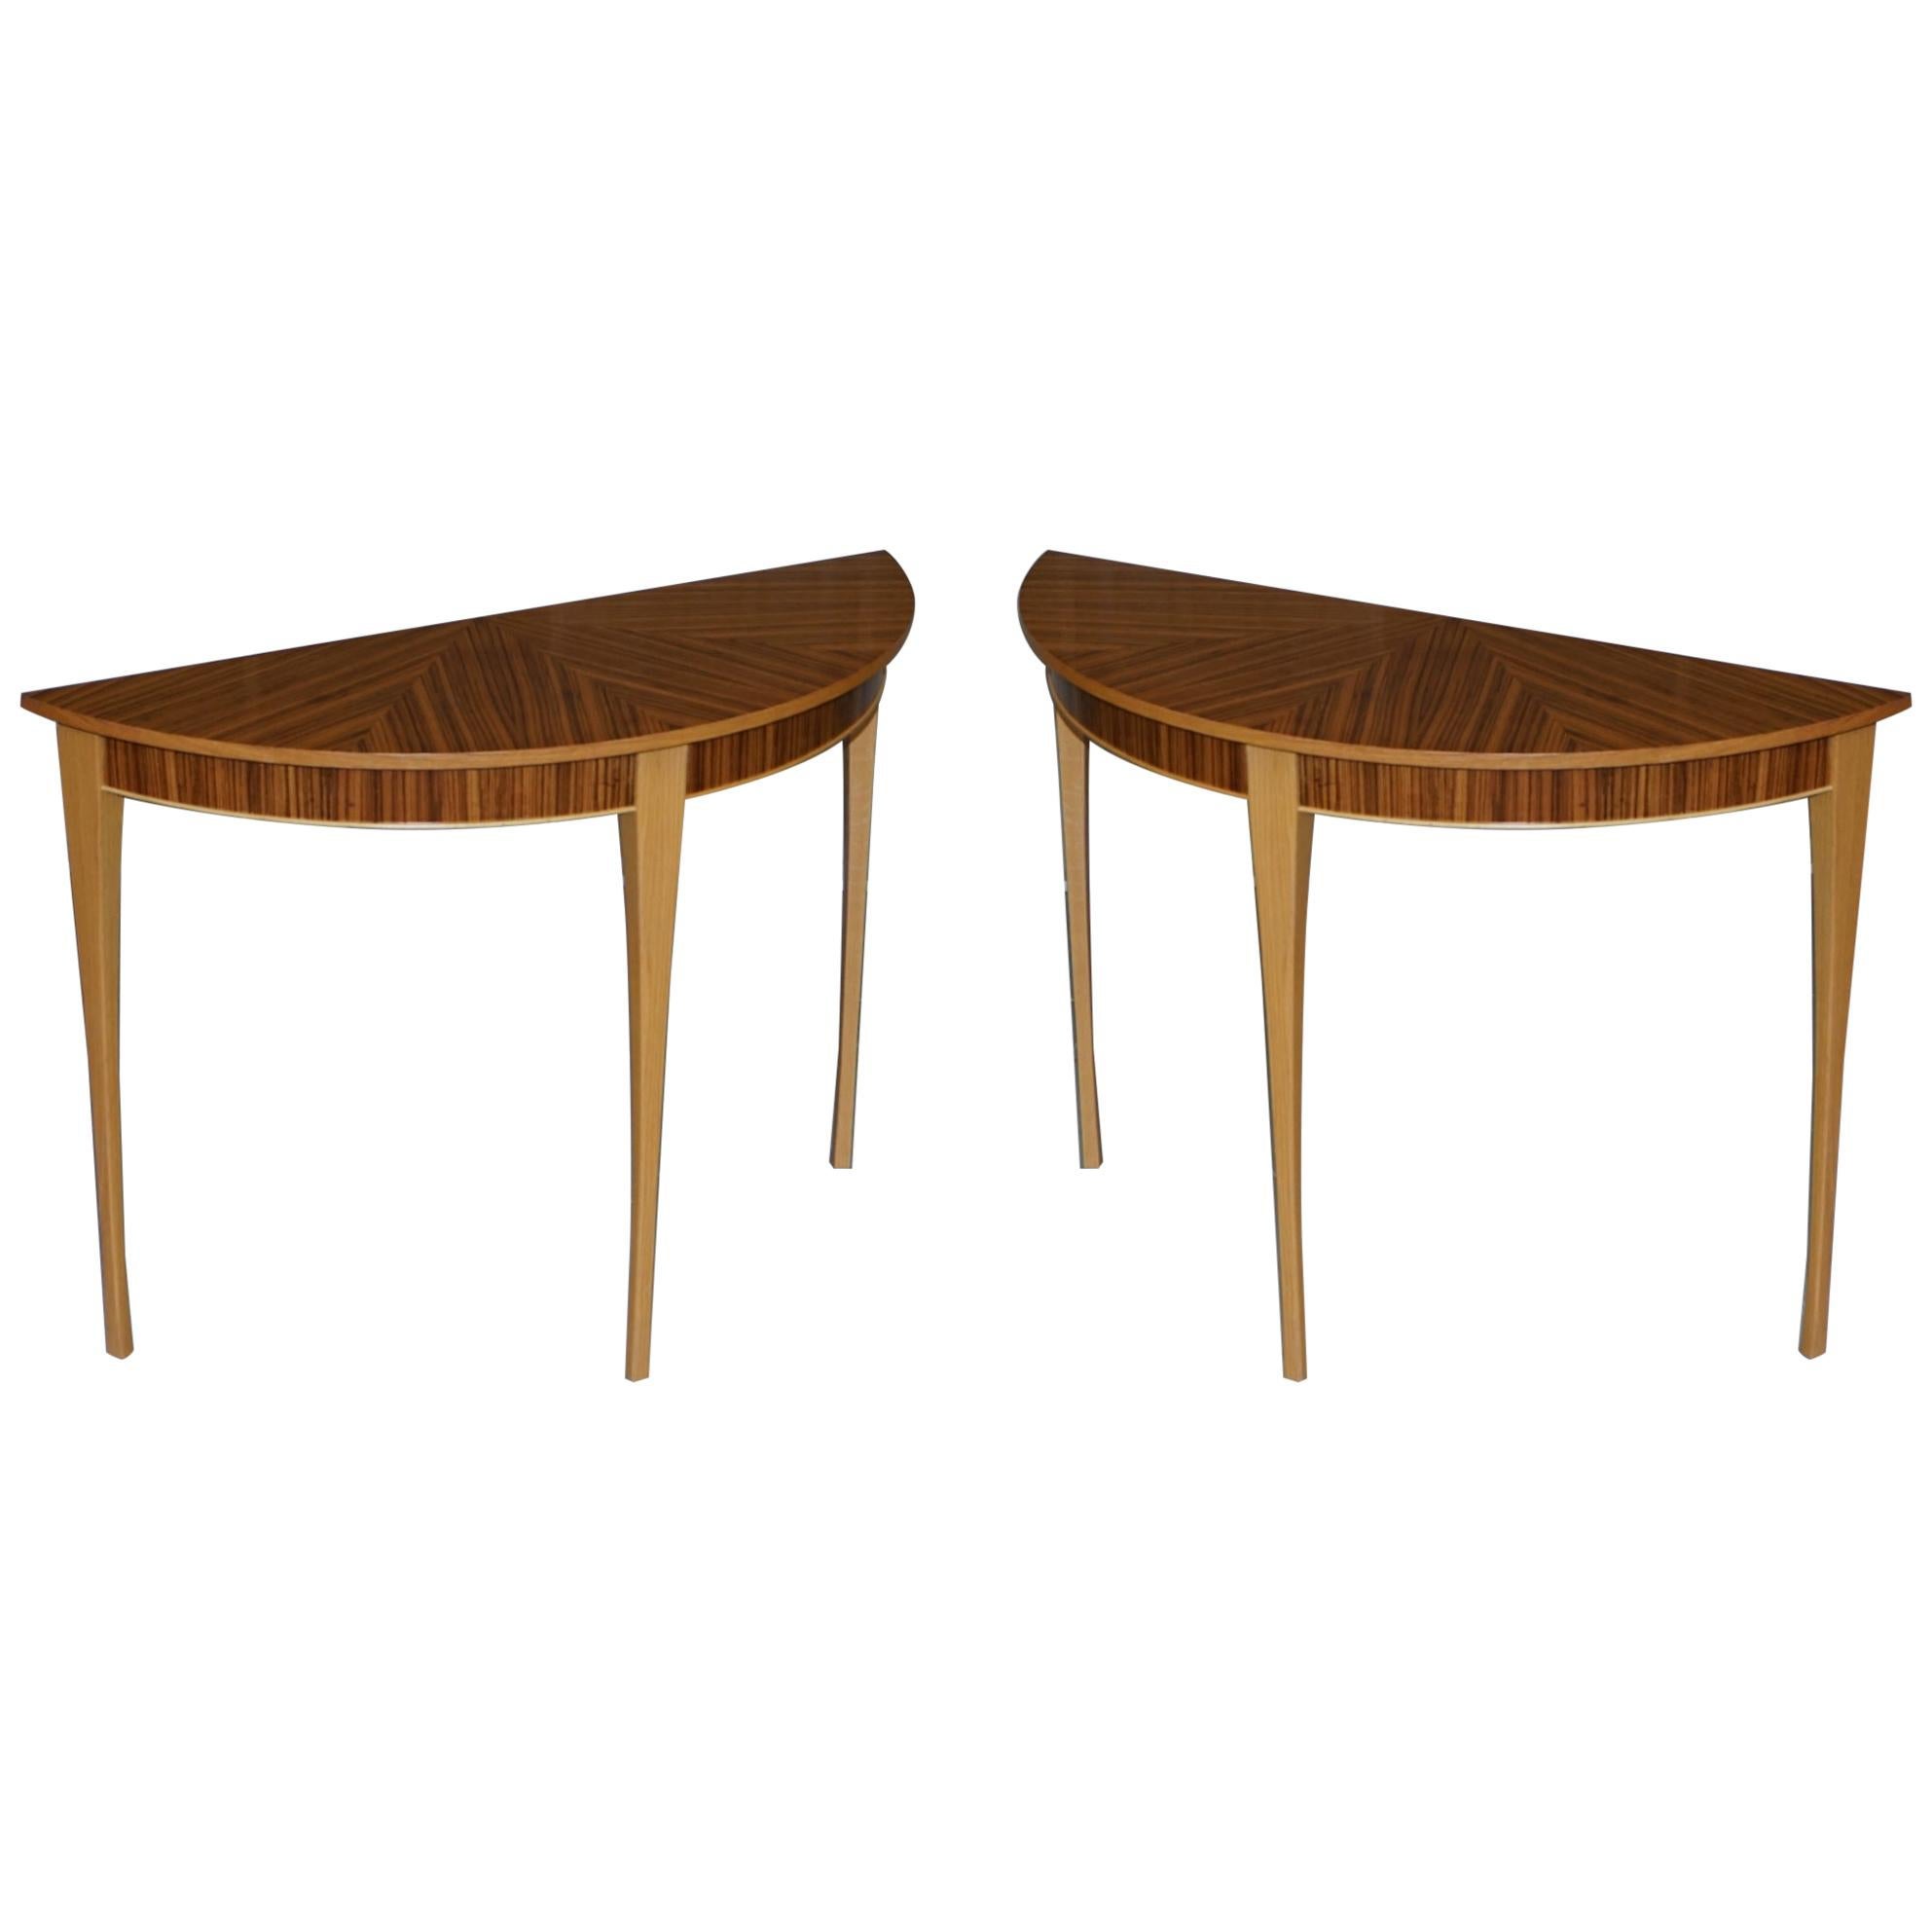 X2 Lovely Bevan Funnell Phoenix Zebrano Wood Demilune Console Tables For Sale